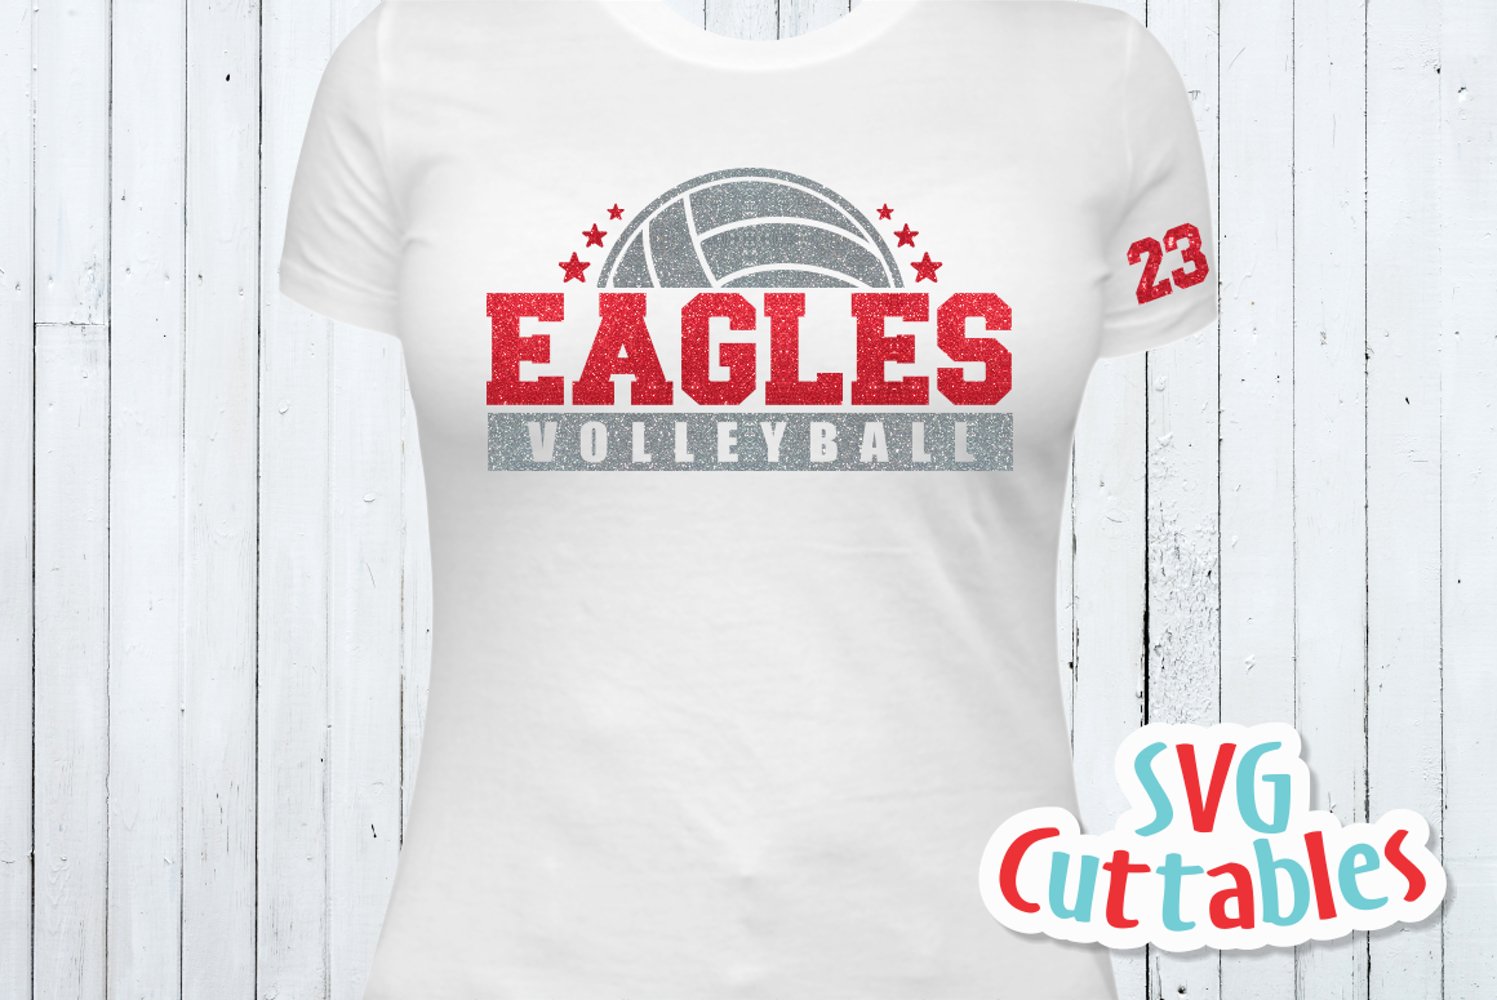 White t-shirt design for volleyball team.